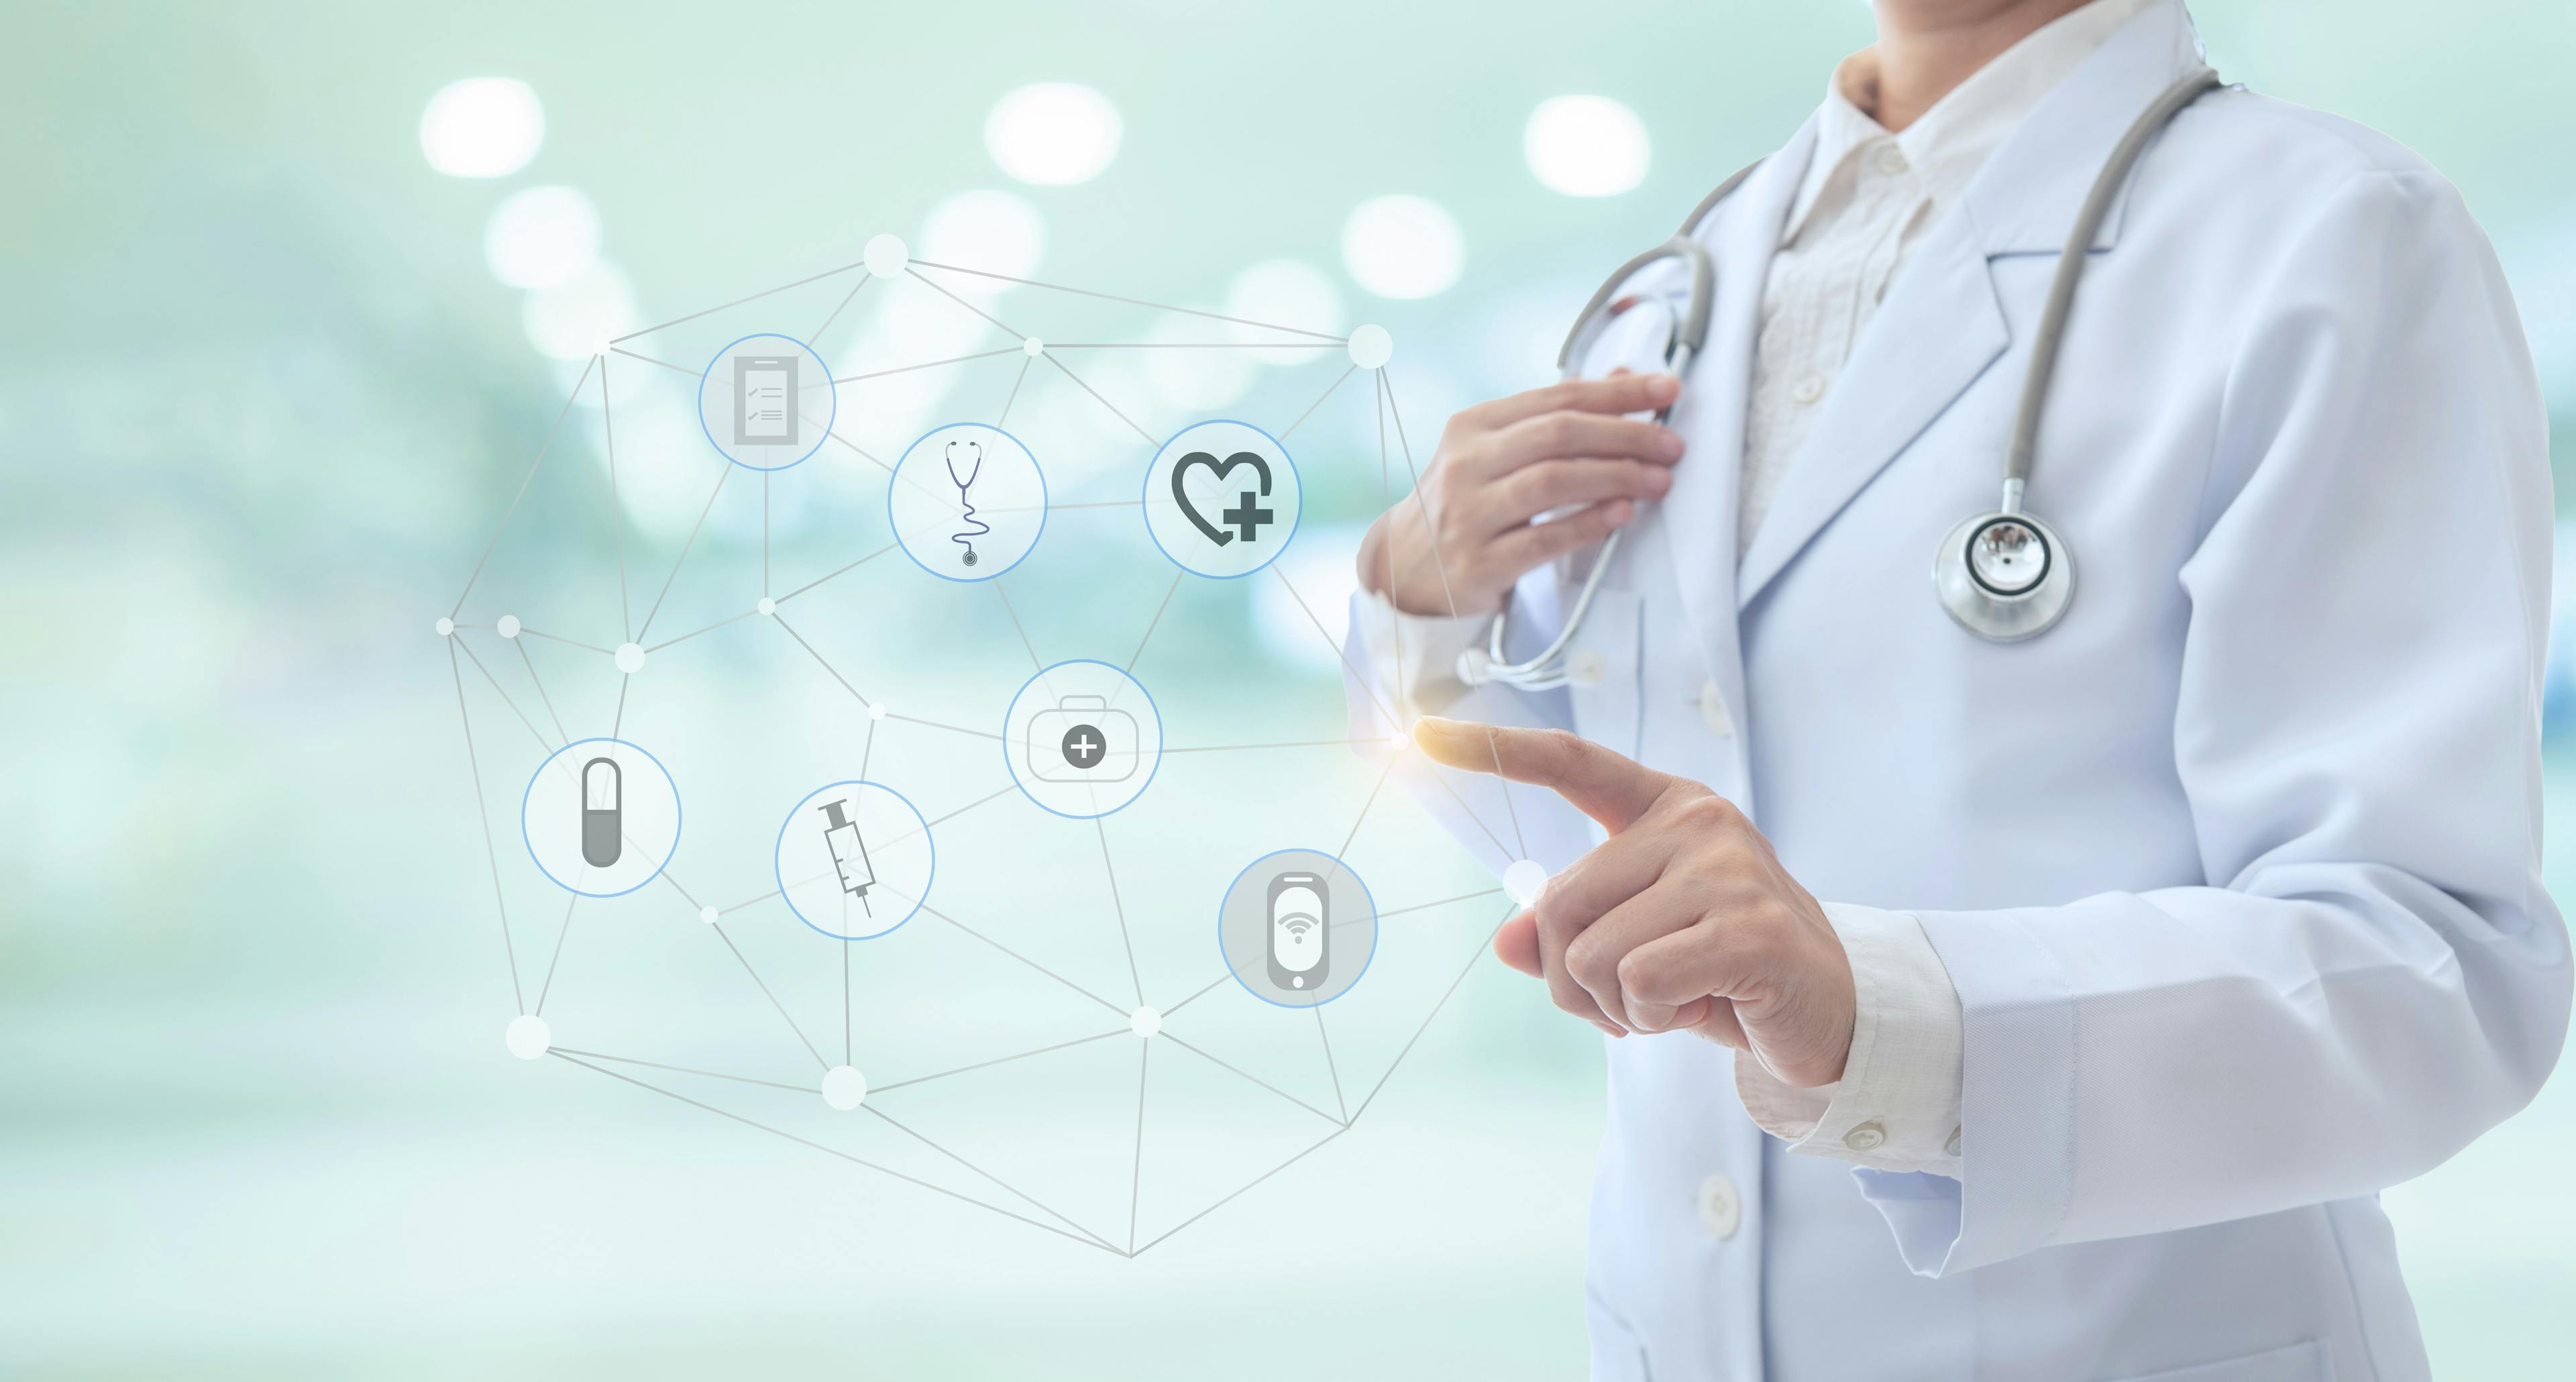 Why Adopting Tools That Support Virtualization of Care Is Critical 